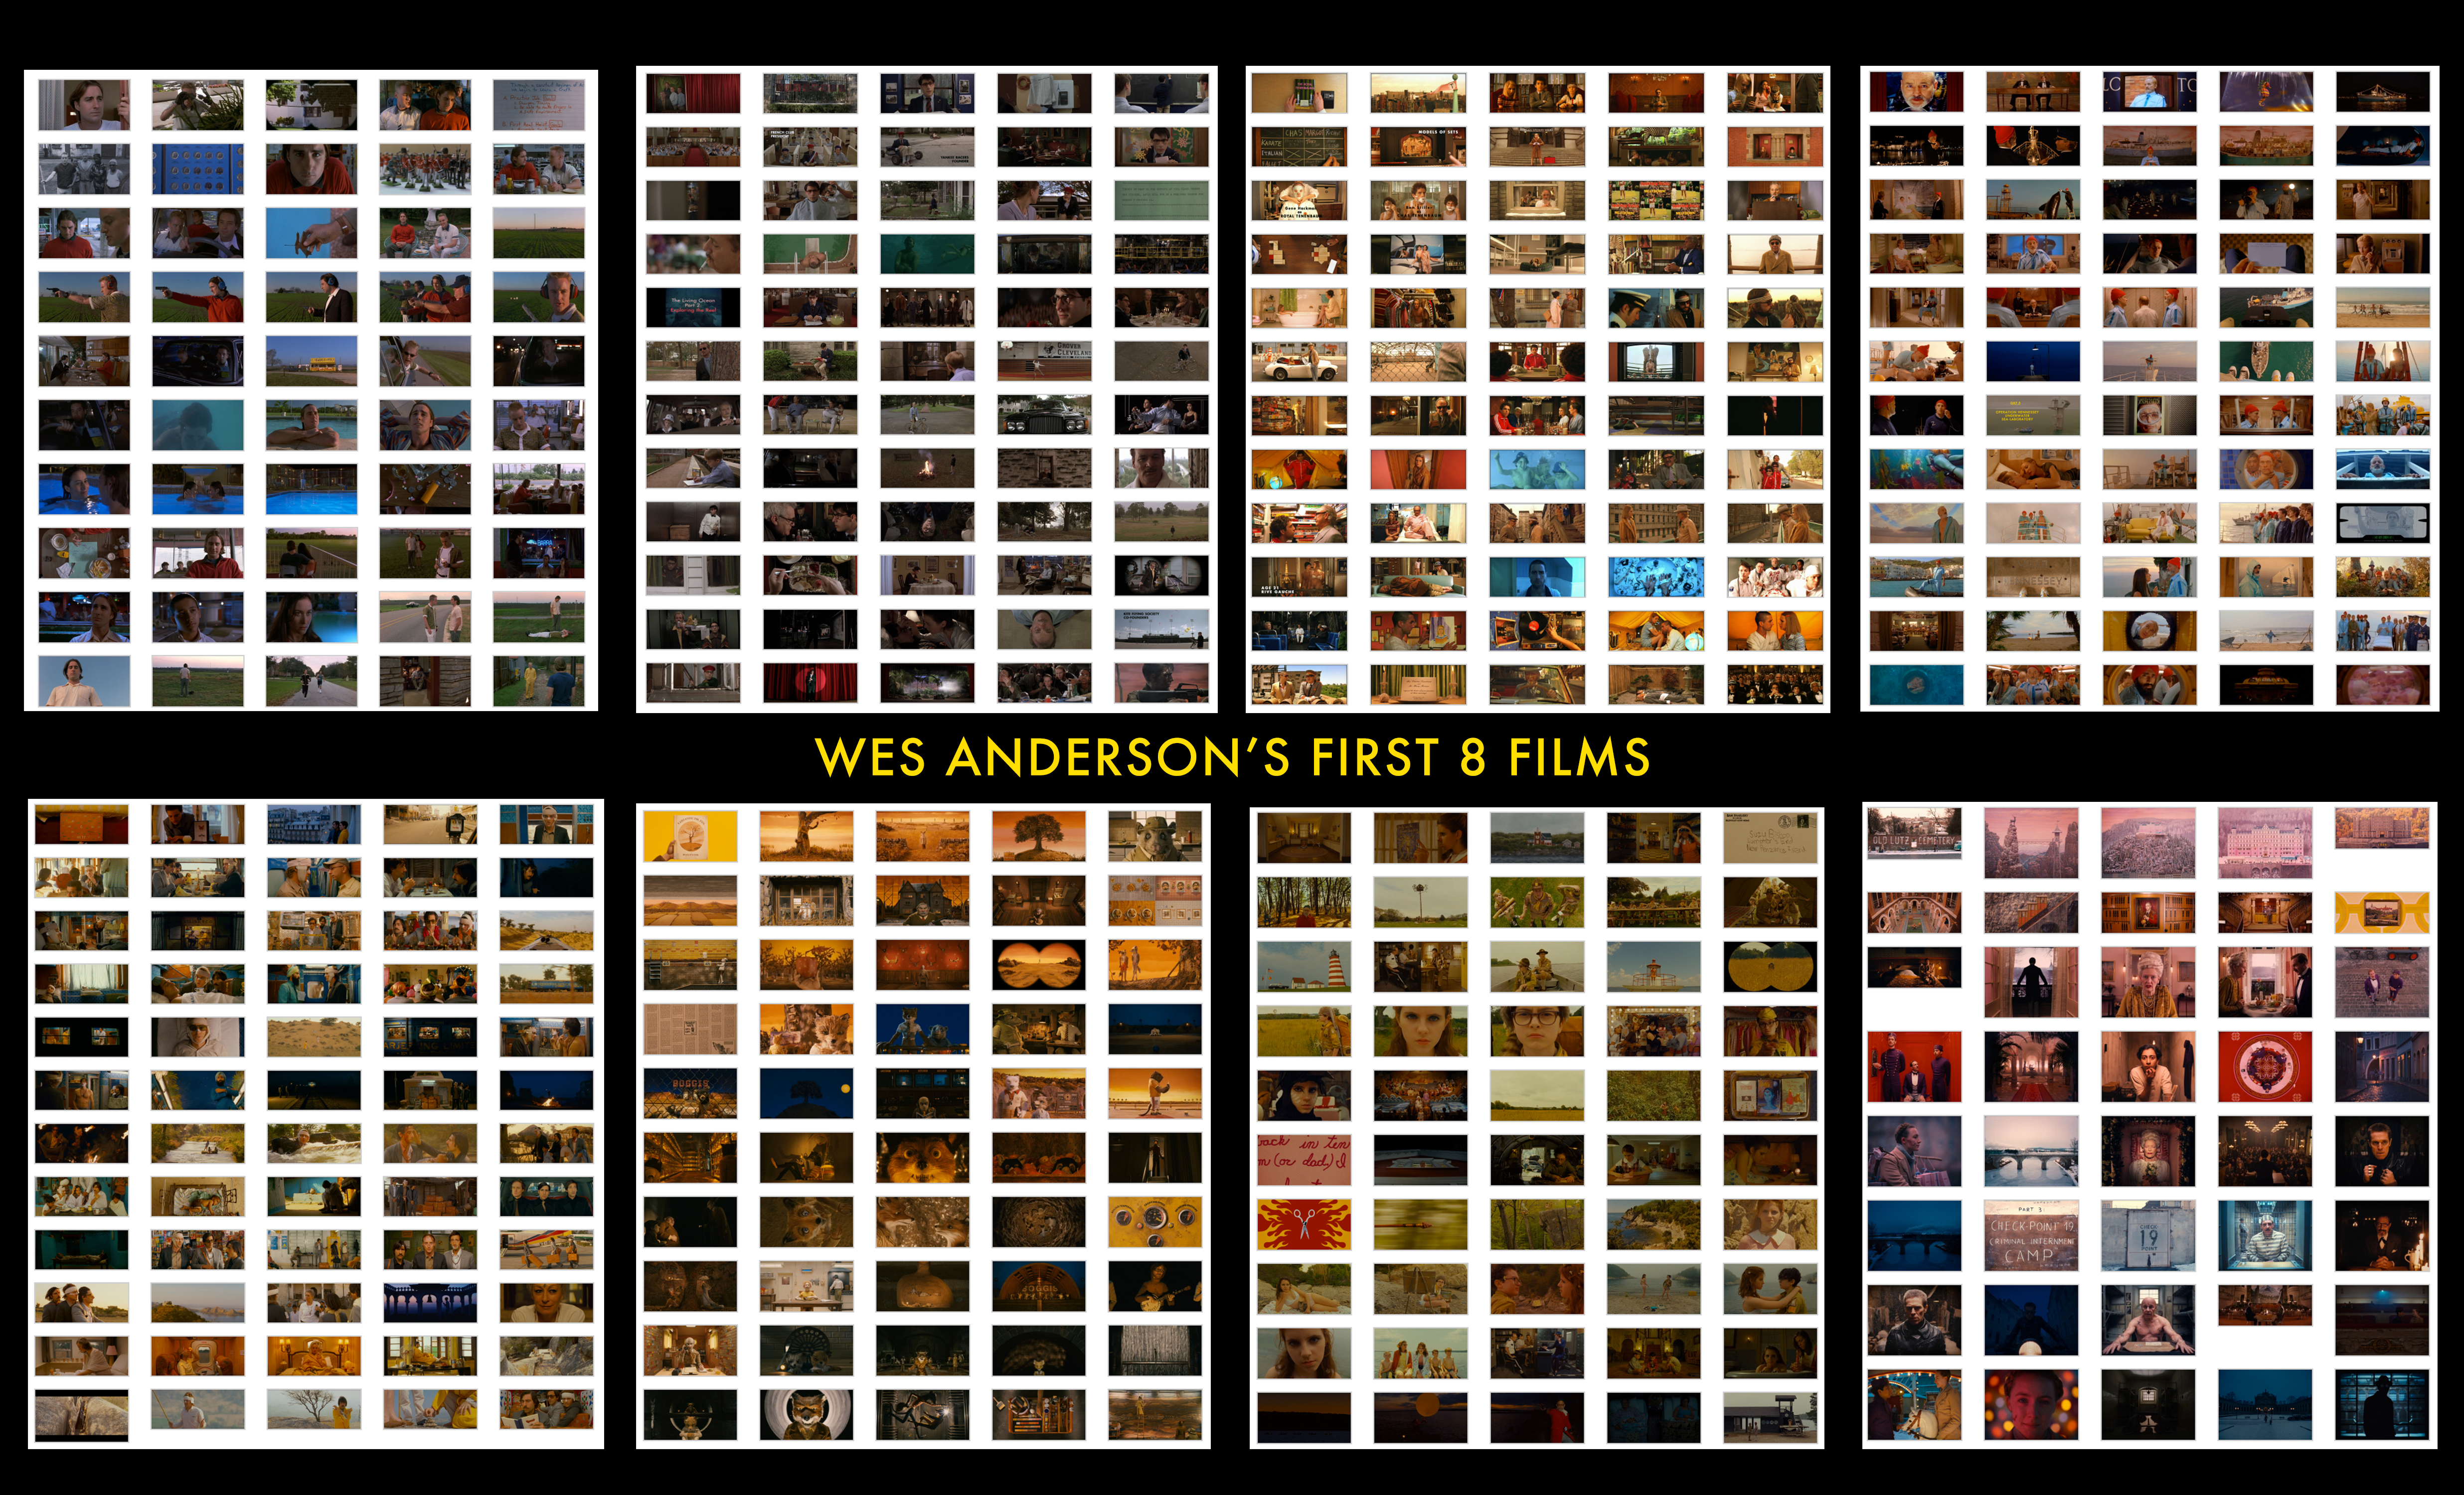 Wes Anderson's Symmetrical Film Styling